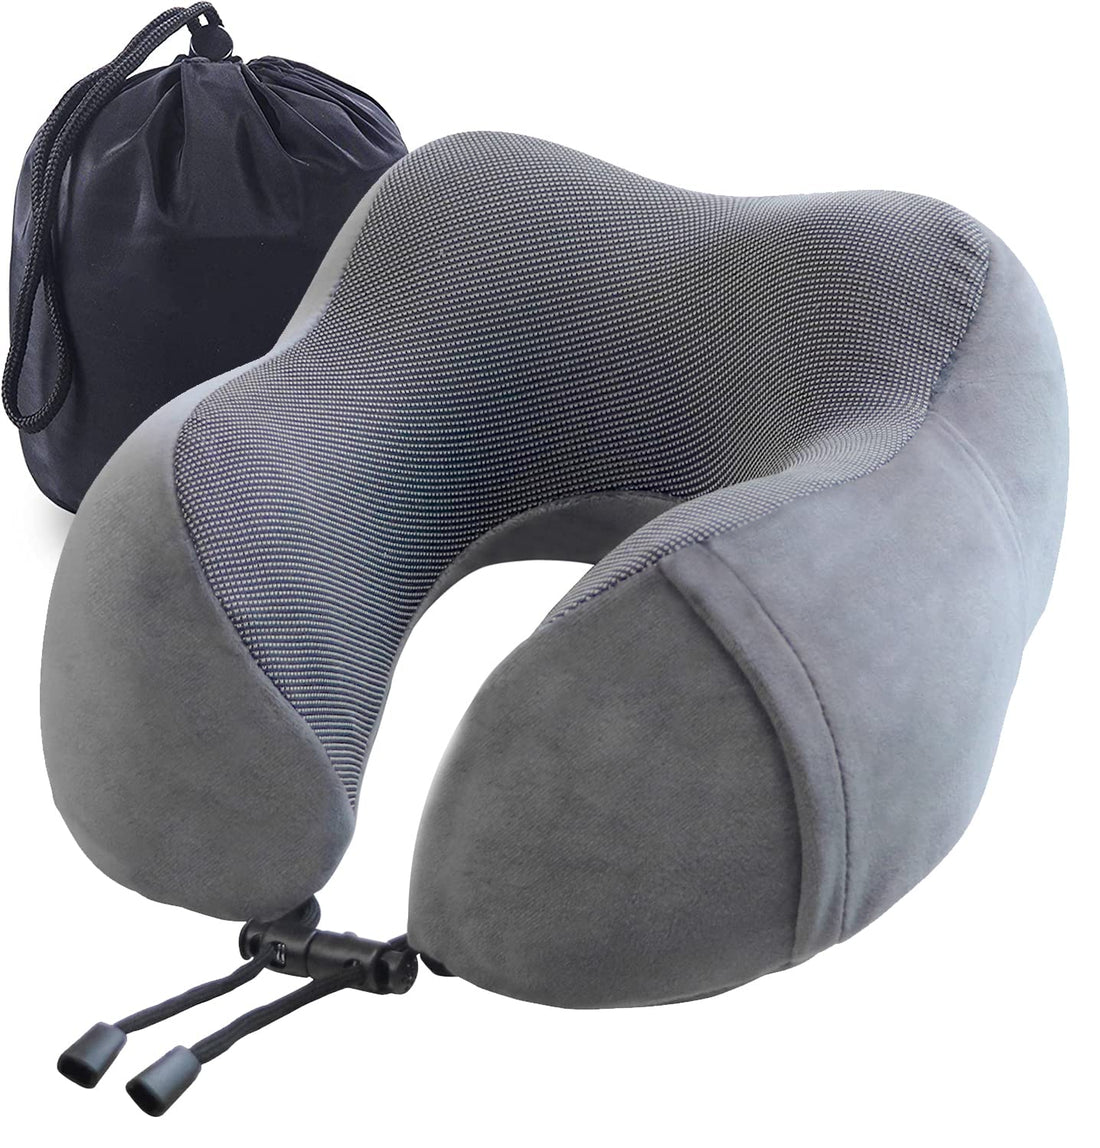 YIRFEIKRER Travel Pillow, Best Memory Foam Neck Pillow and Head Support Soft Pillow with Side Storage Bags, for Sleep Rest, Airplane, Car, Family and Travel Use（Dark Grey）